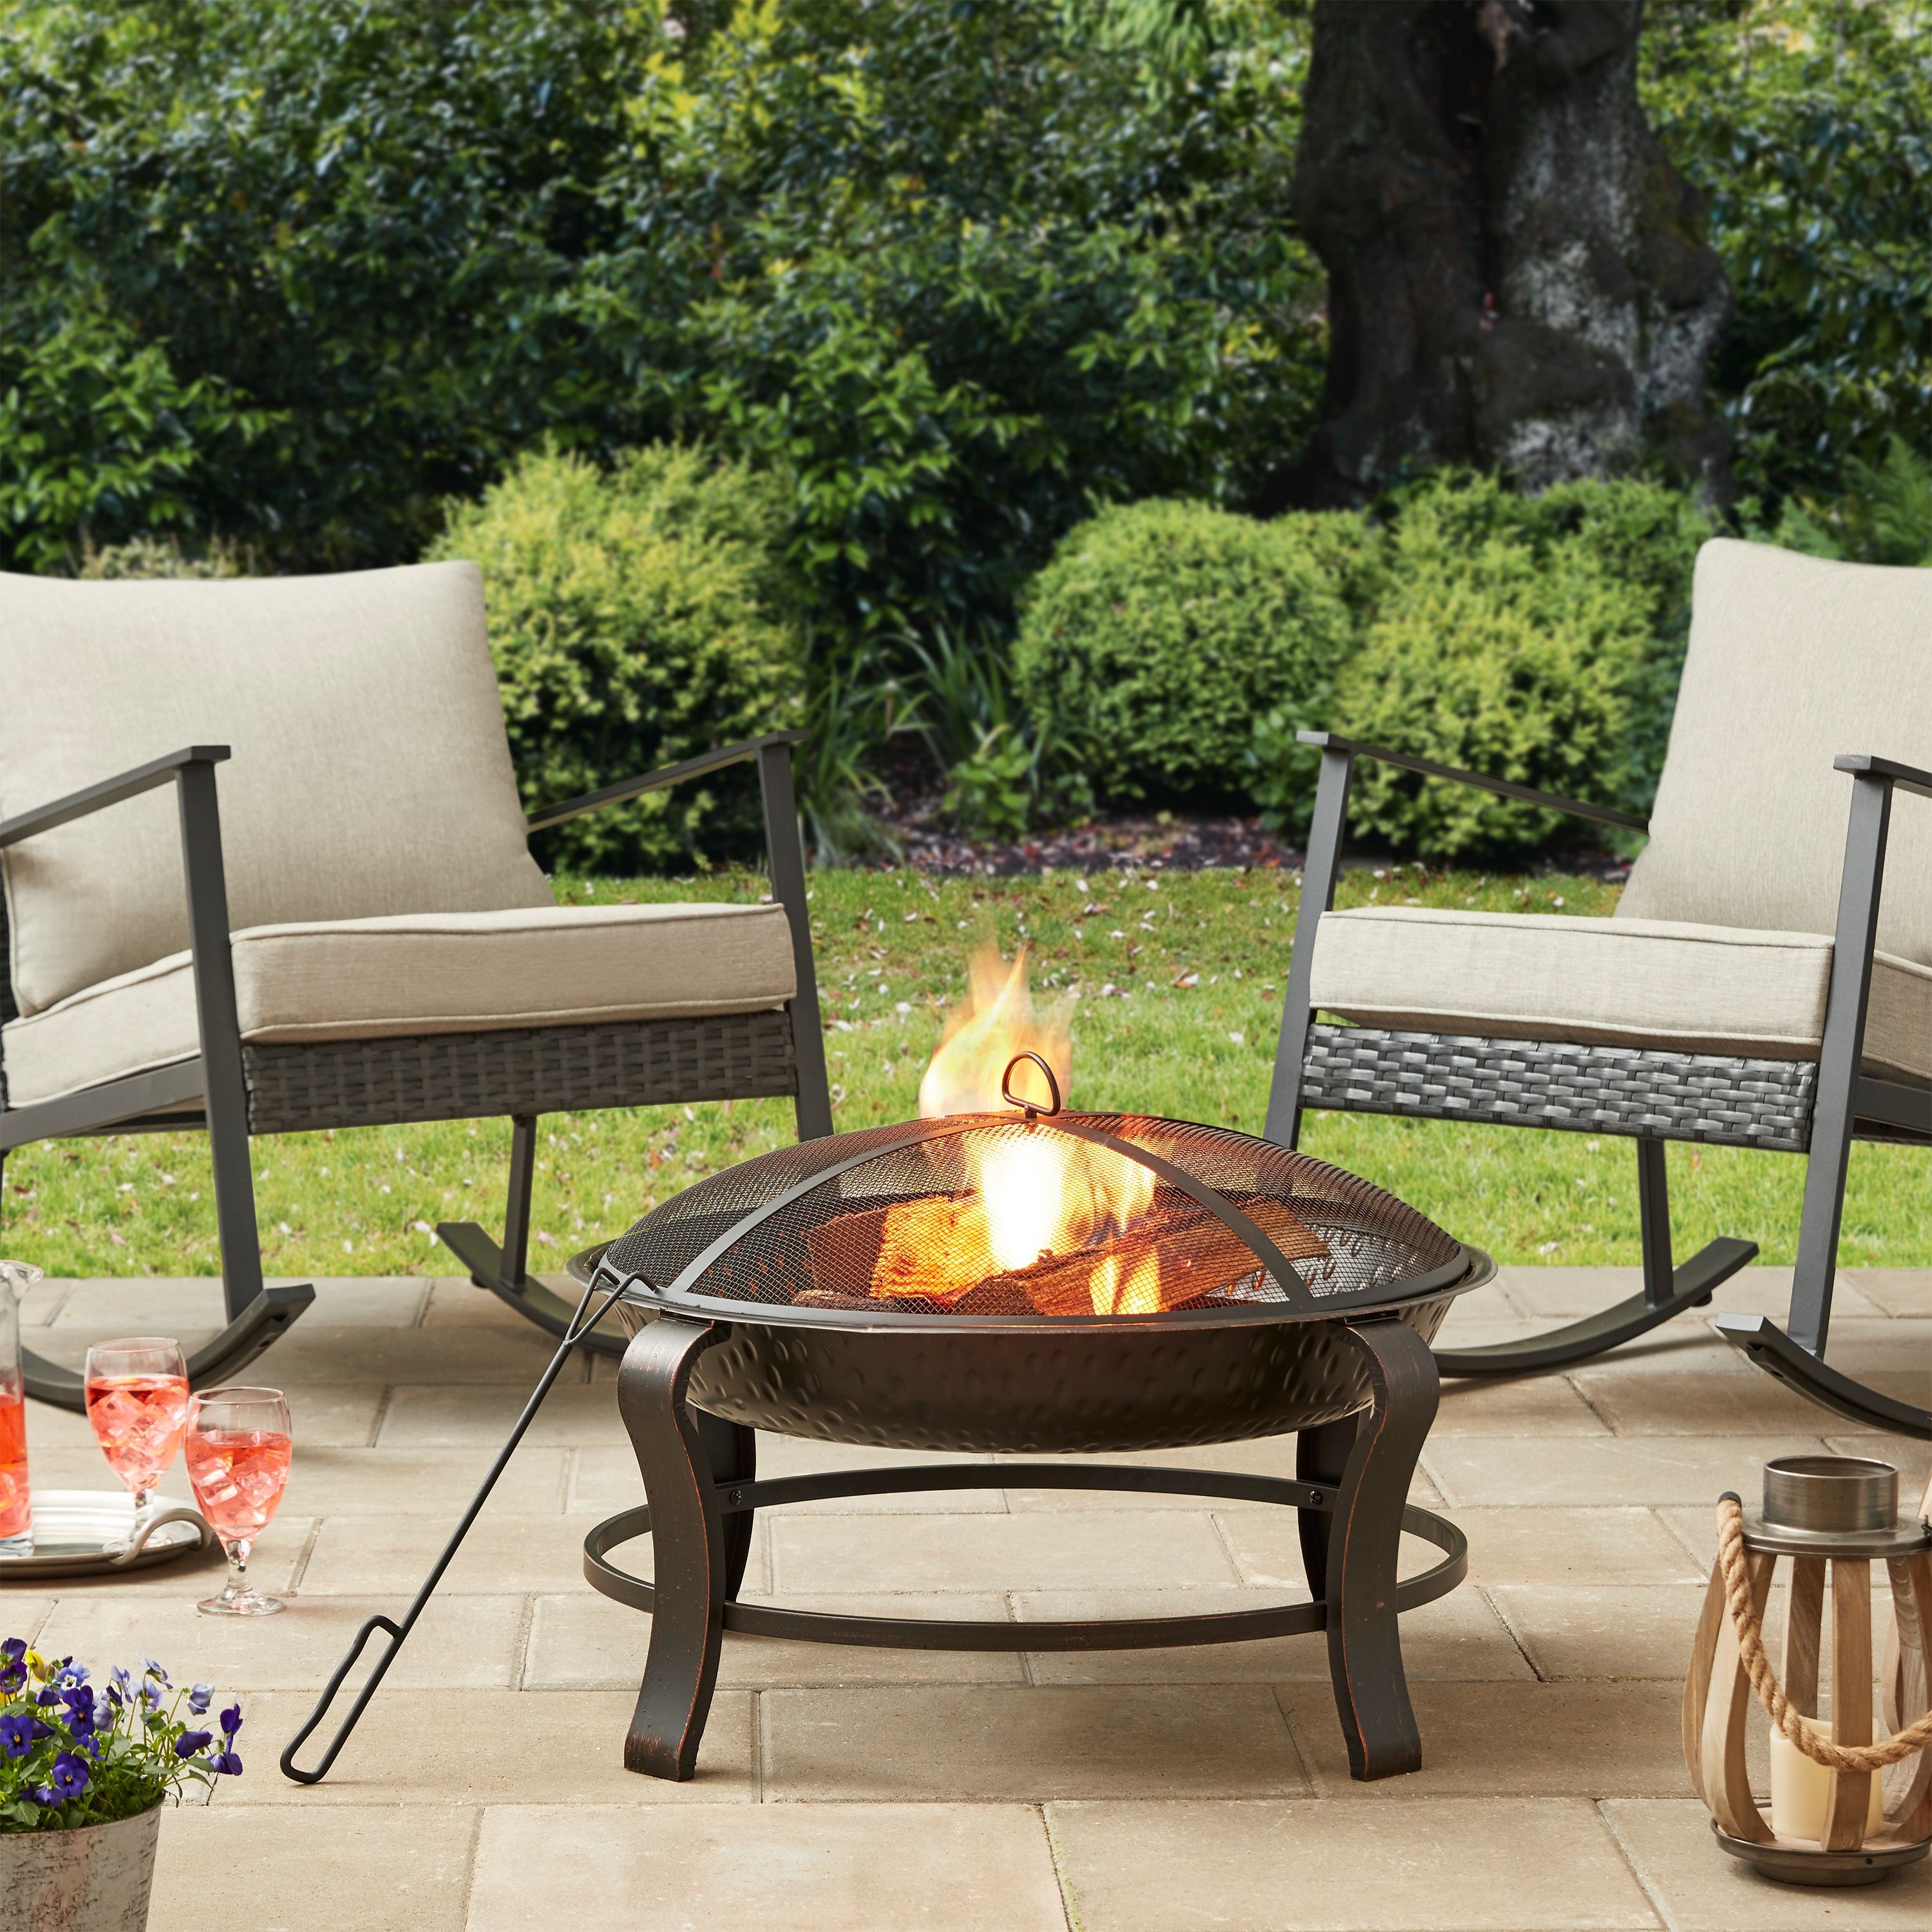 Best Wood Burning Fire Pits Where To, Better Homes And Gardens 57 Inch Fire Pit